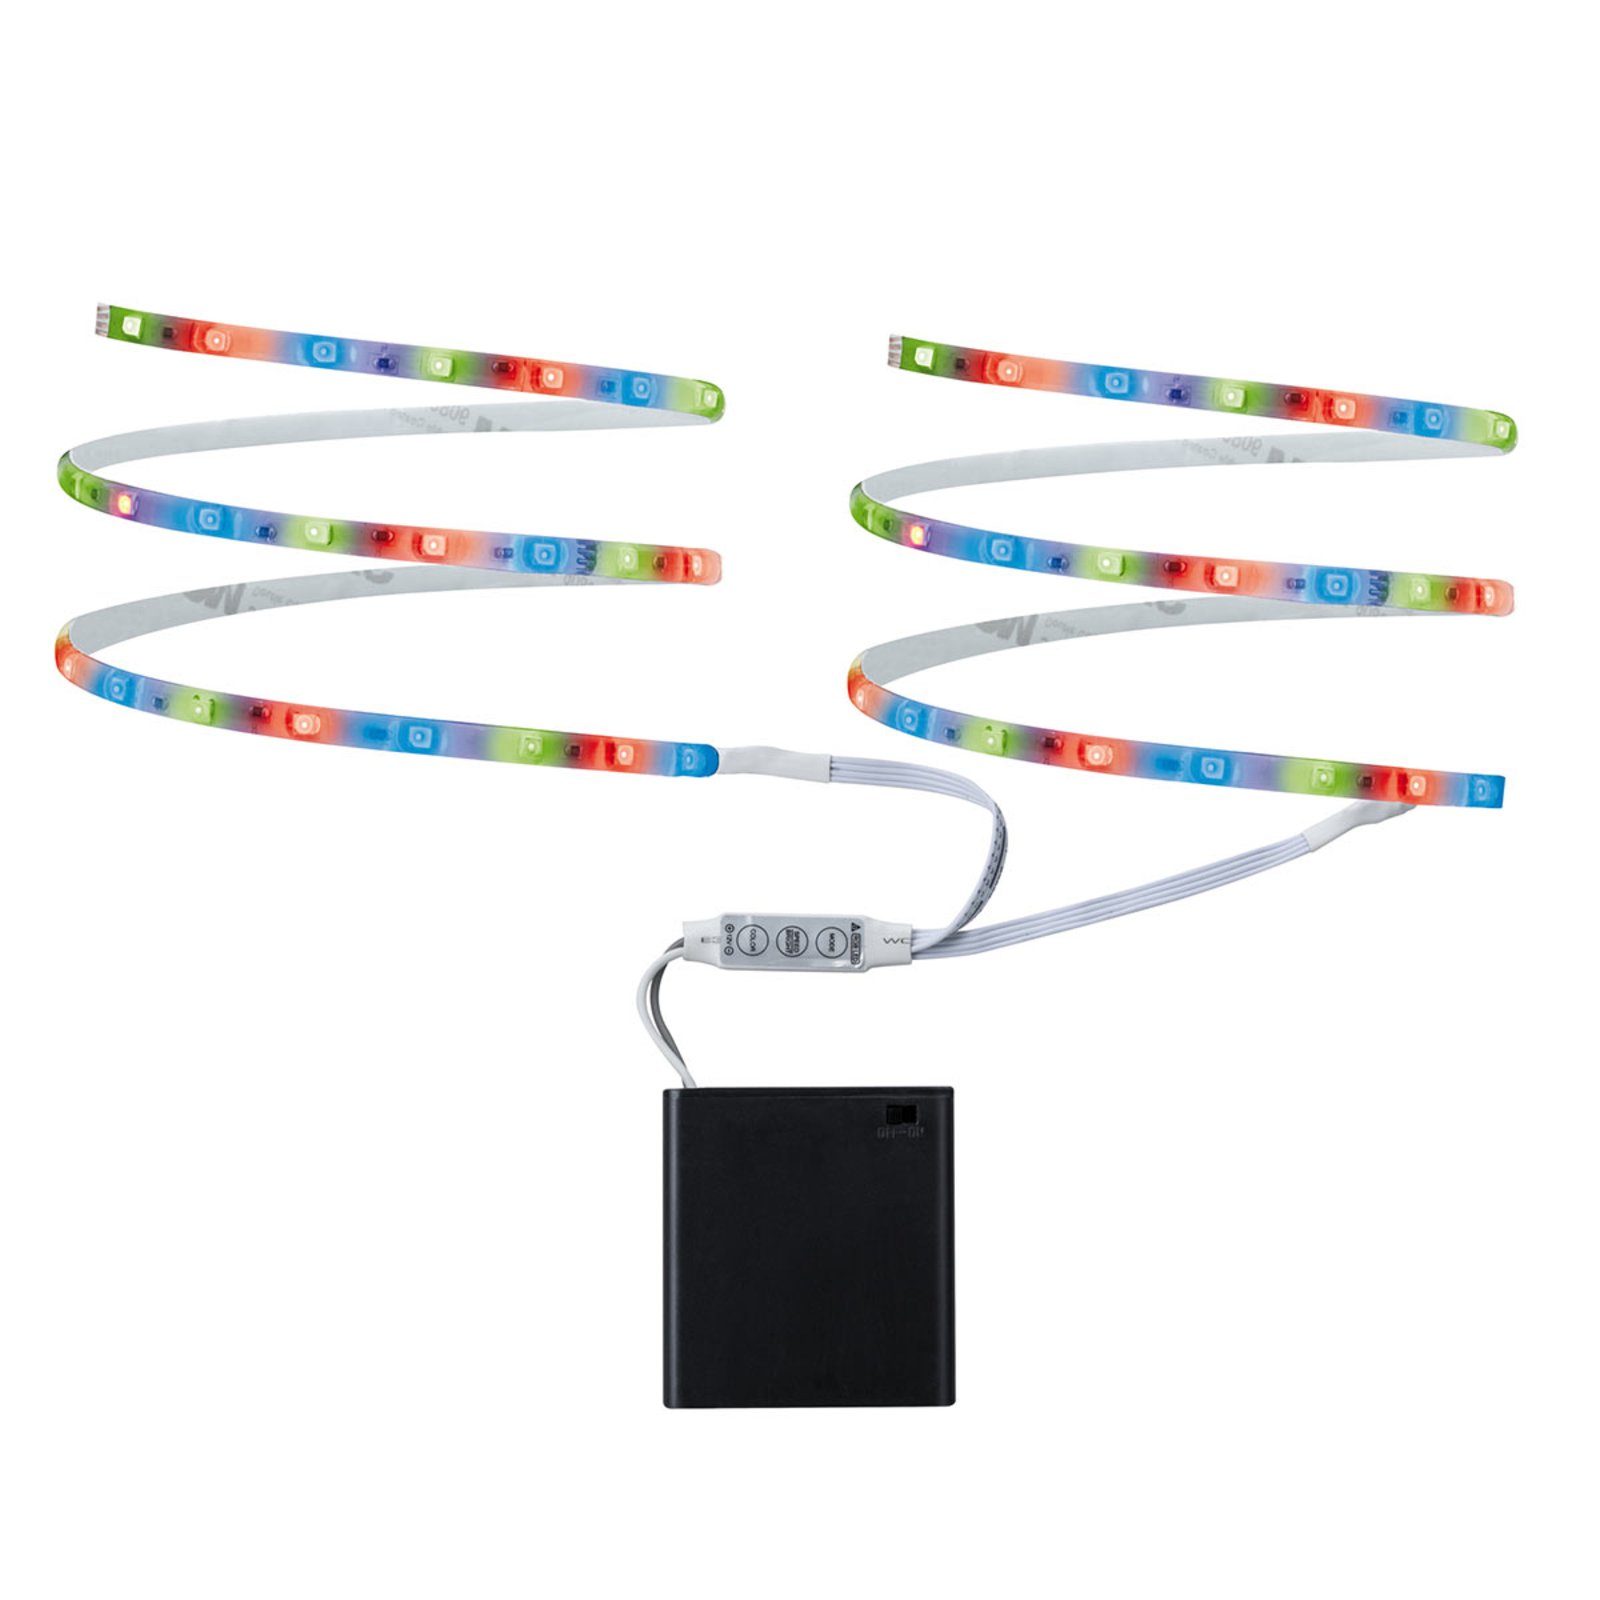 Battery-powered LED mobile strip with RGB LEDs